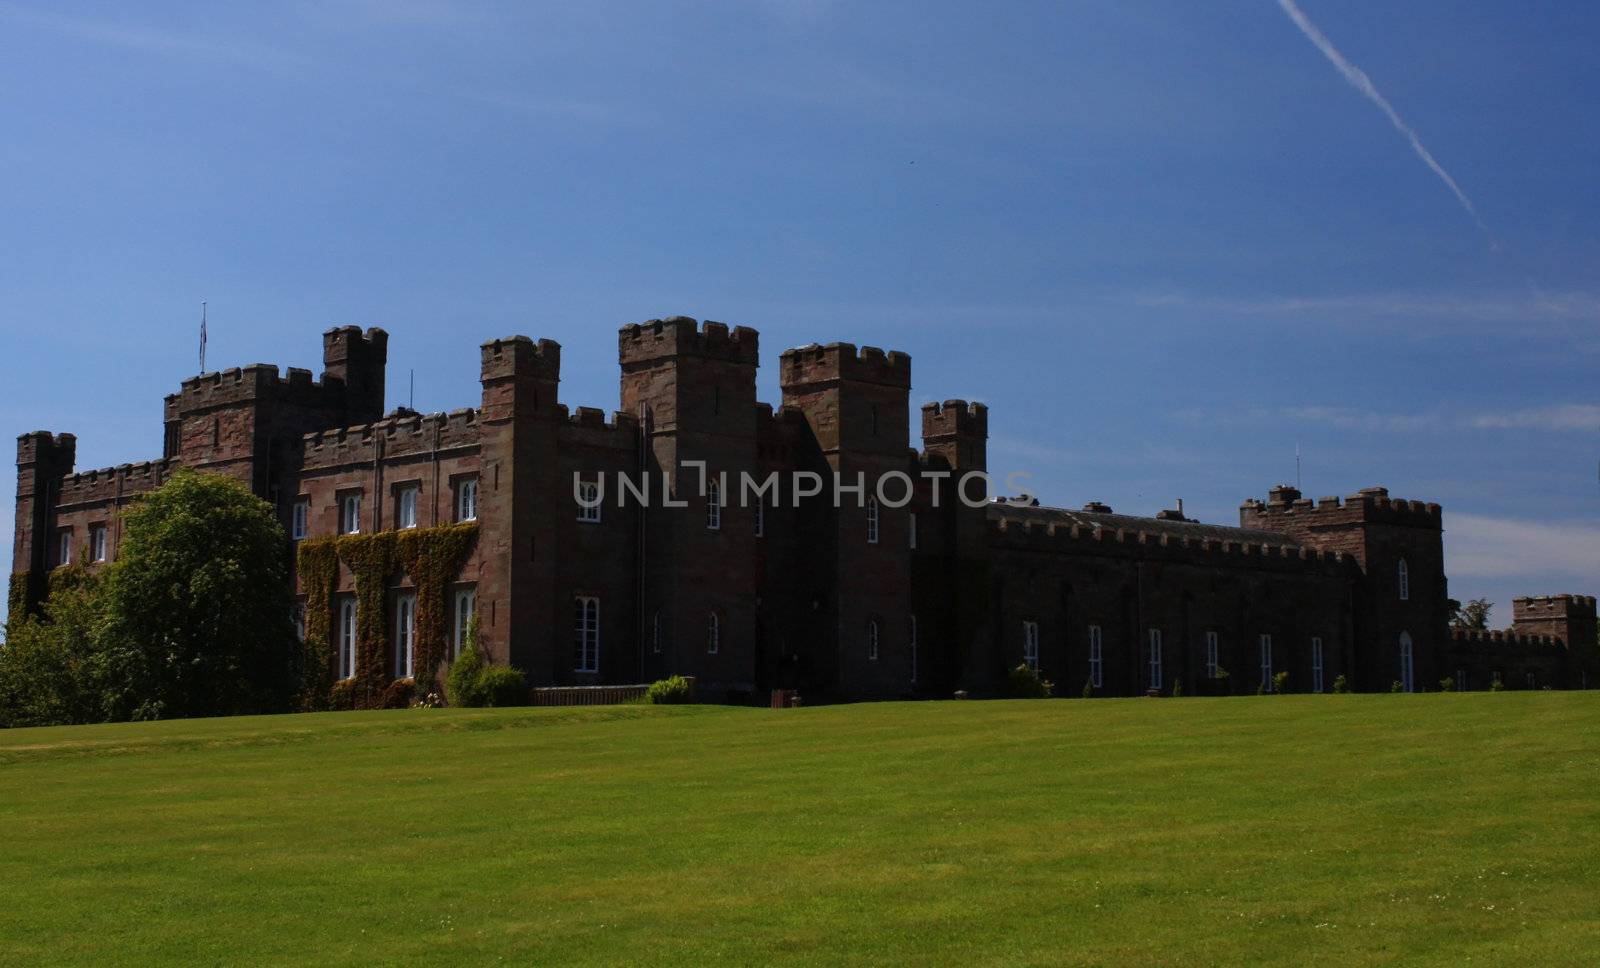 A view of Scone Palace in Perth, Scotland against green grass and a blue sky.
